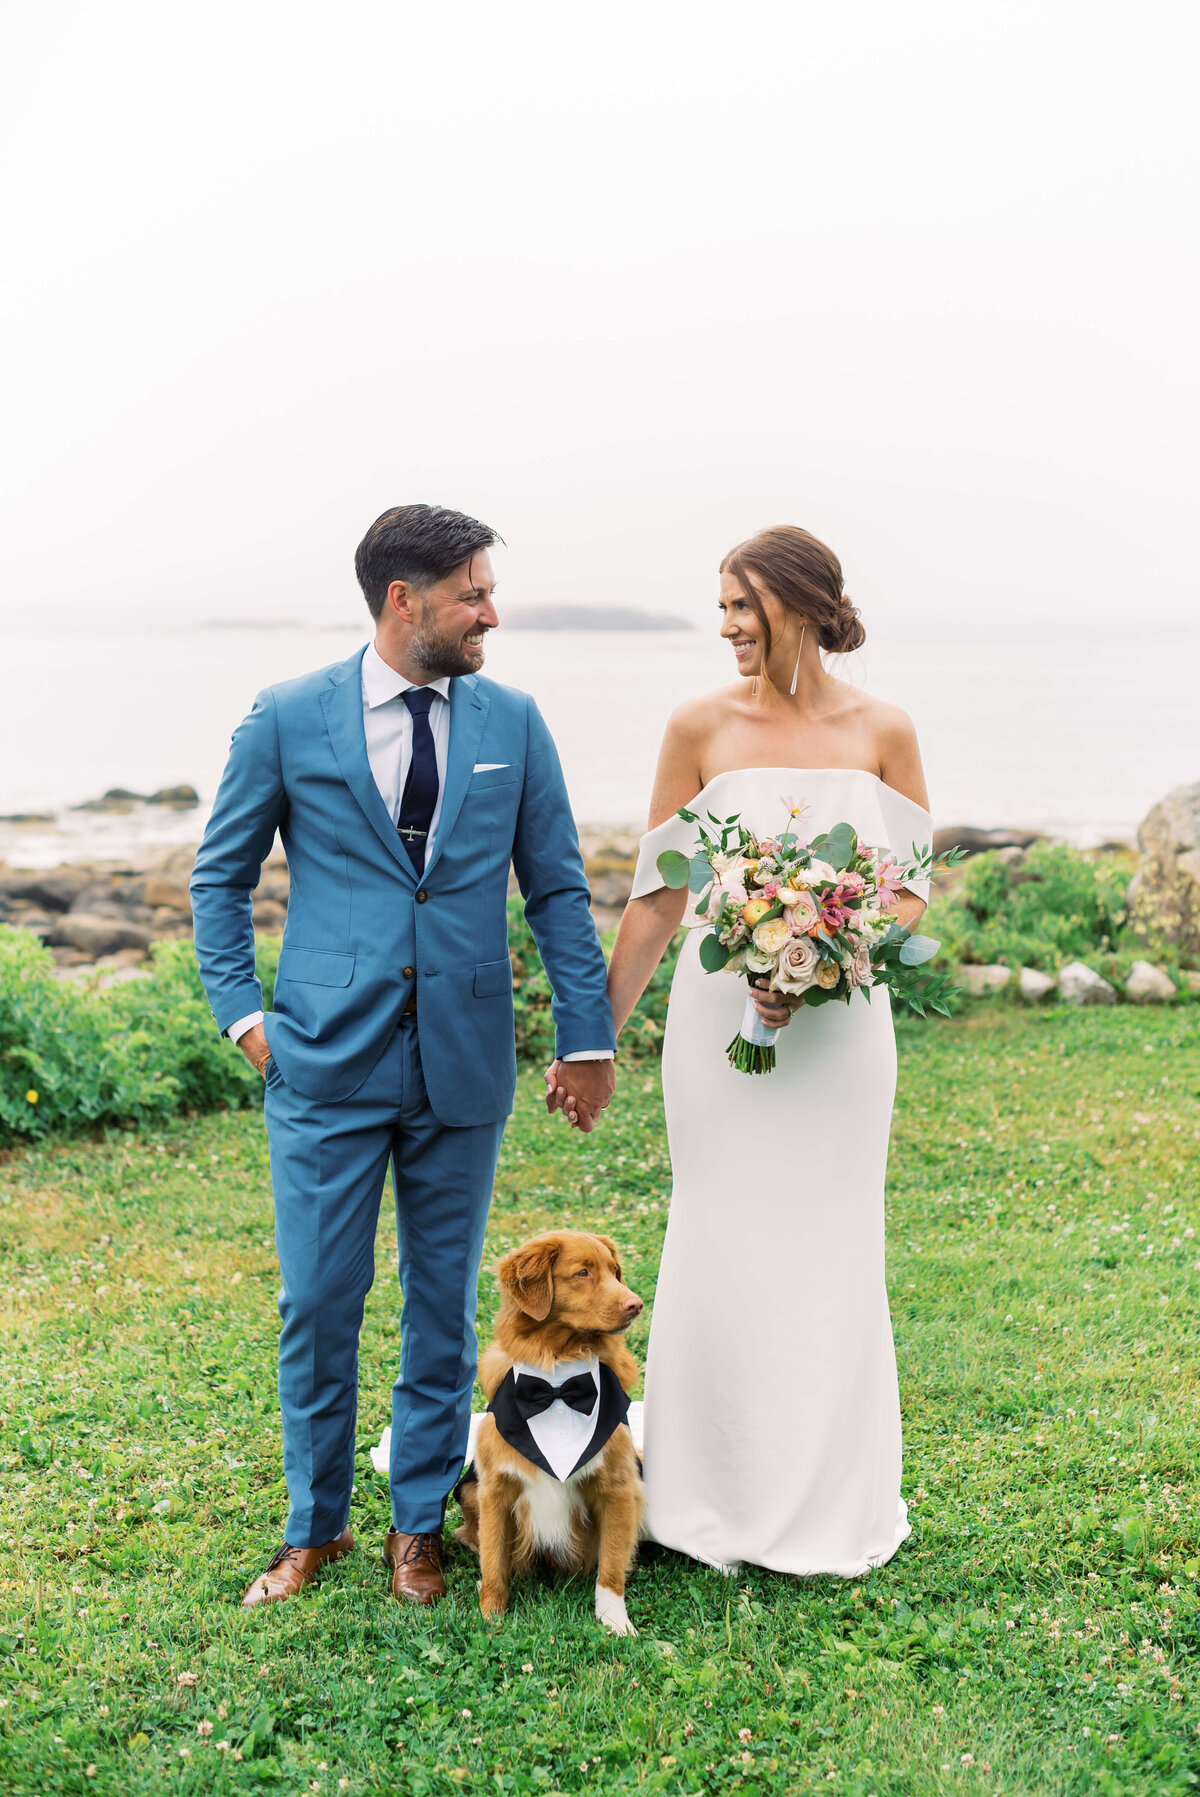 Bride and groom holding hands with dog beside them at Oceanstone Resort Wedding in Nova Scotia